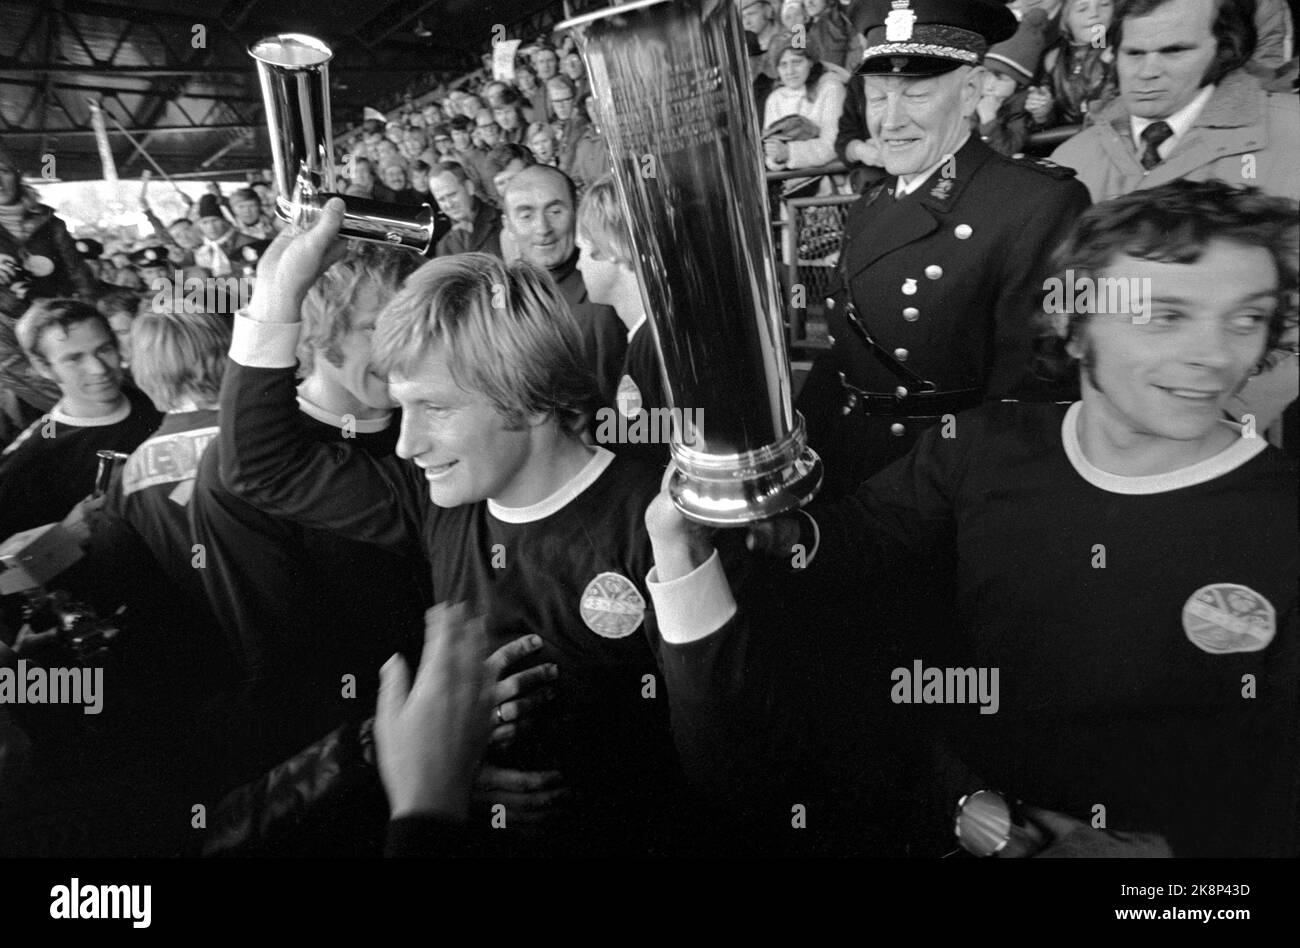 Oslo October 1973. Soccer. Cup final Strømsgodset - Rosenborg 1-0, Ullevaal Stadium. SIF players with trophy cheer. Steinar Pettersen with the King's Cup. Ntb archive photo / ntb Stock Photo